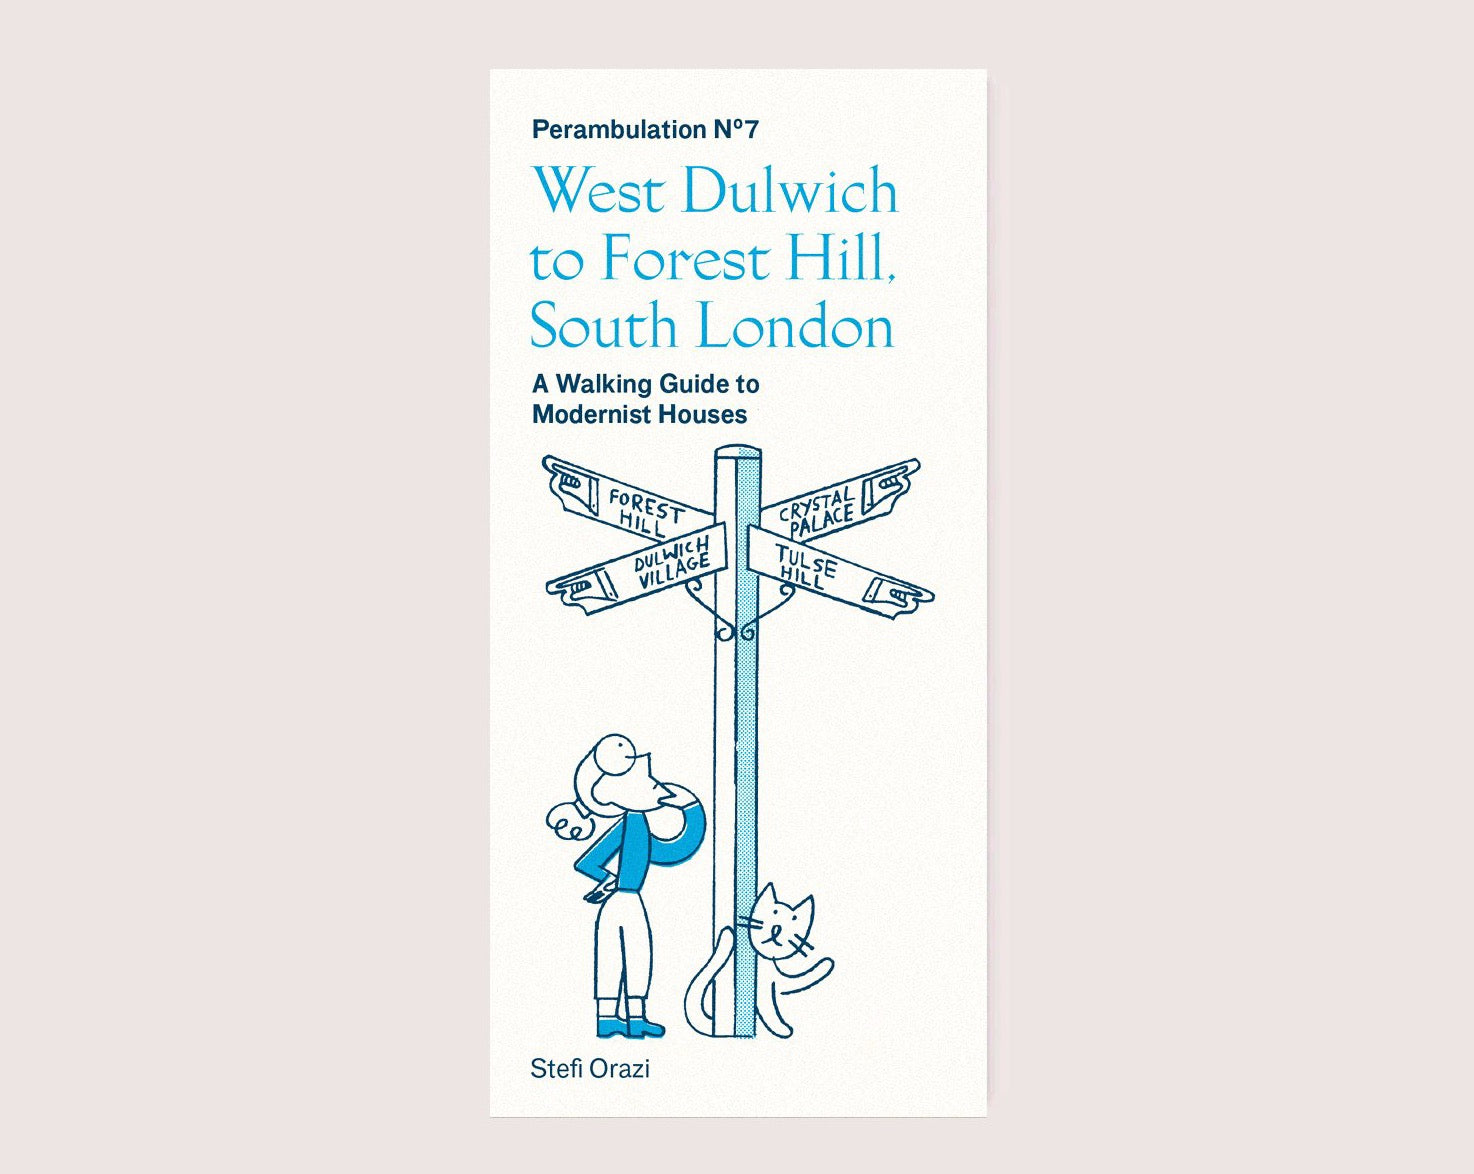 Perambulation Nº7—A Walking Guide to Modernist Houses from West Dulwich to Forest Hill by Stefi Orazi